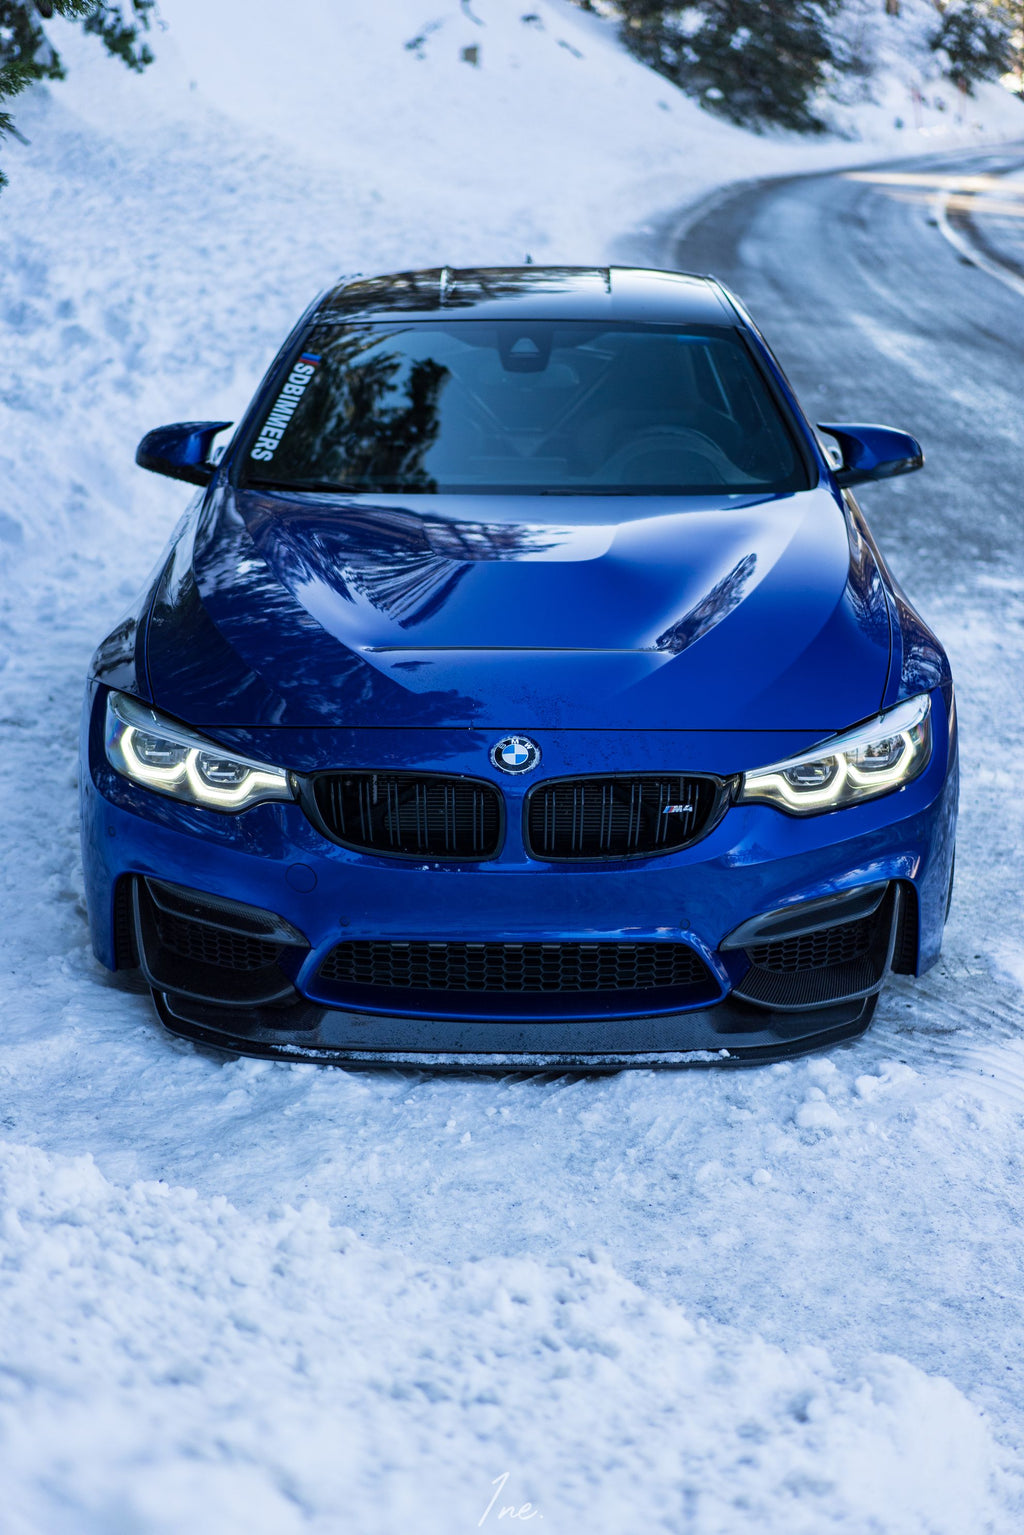 BMW F8X M3 and M4 GTS Style Carbon Fiber Front Lip Spoiler